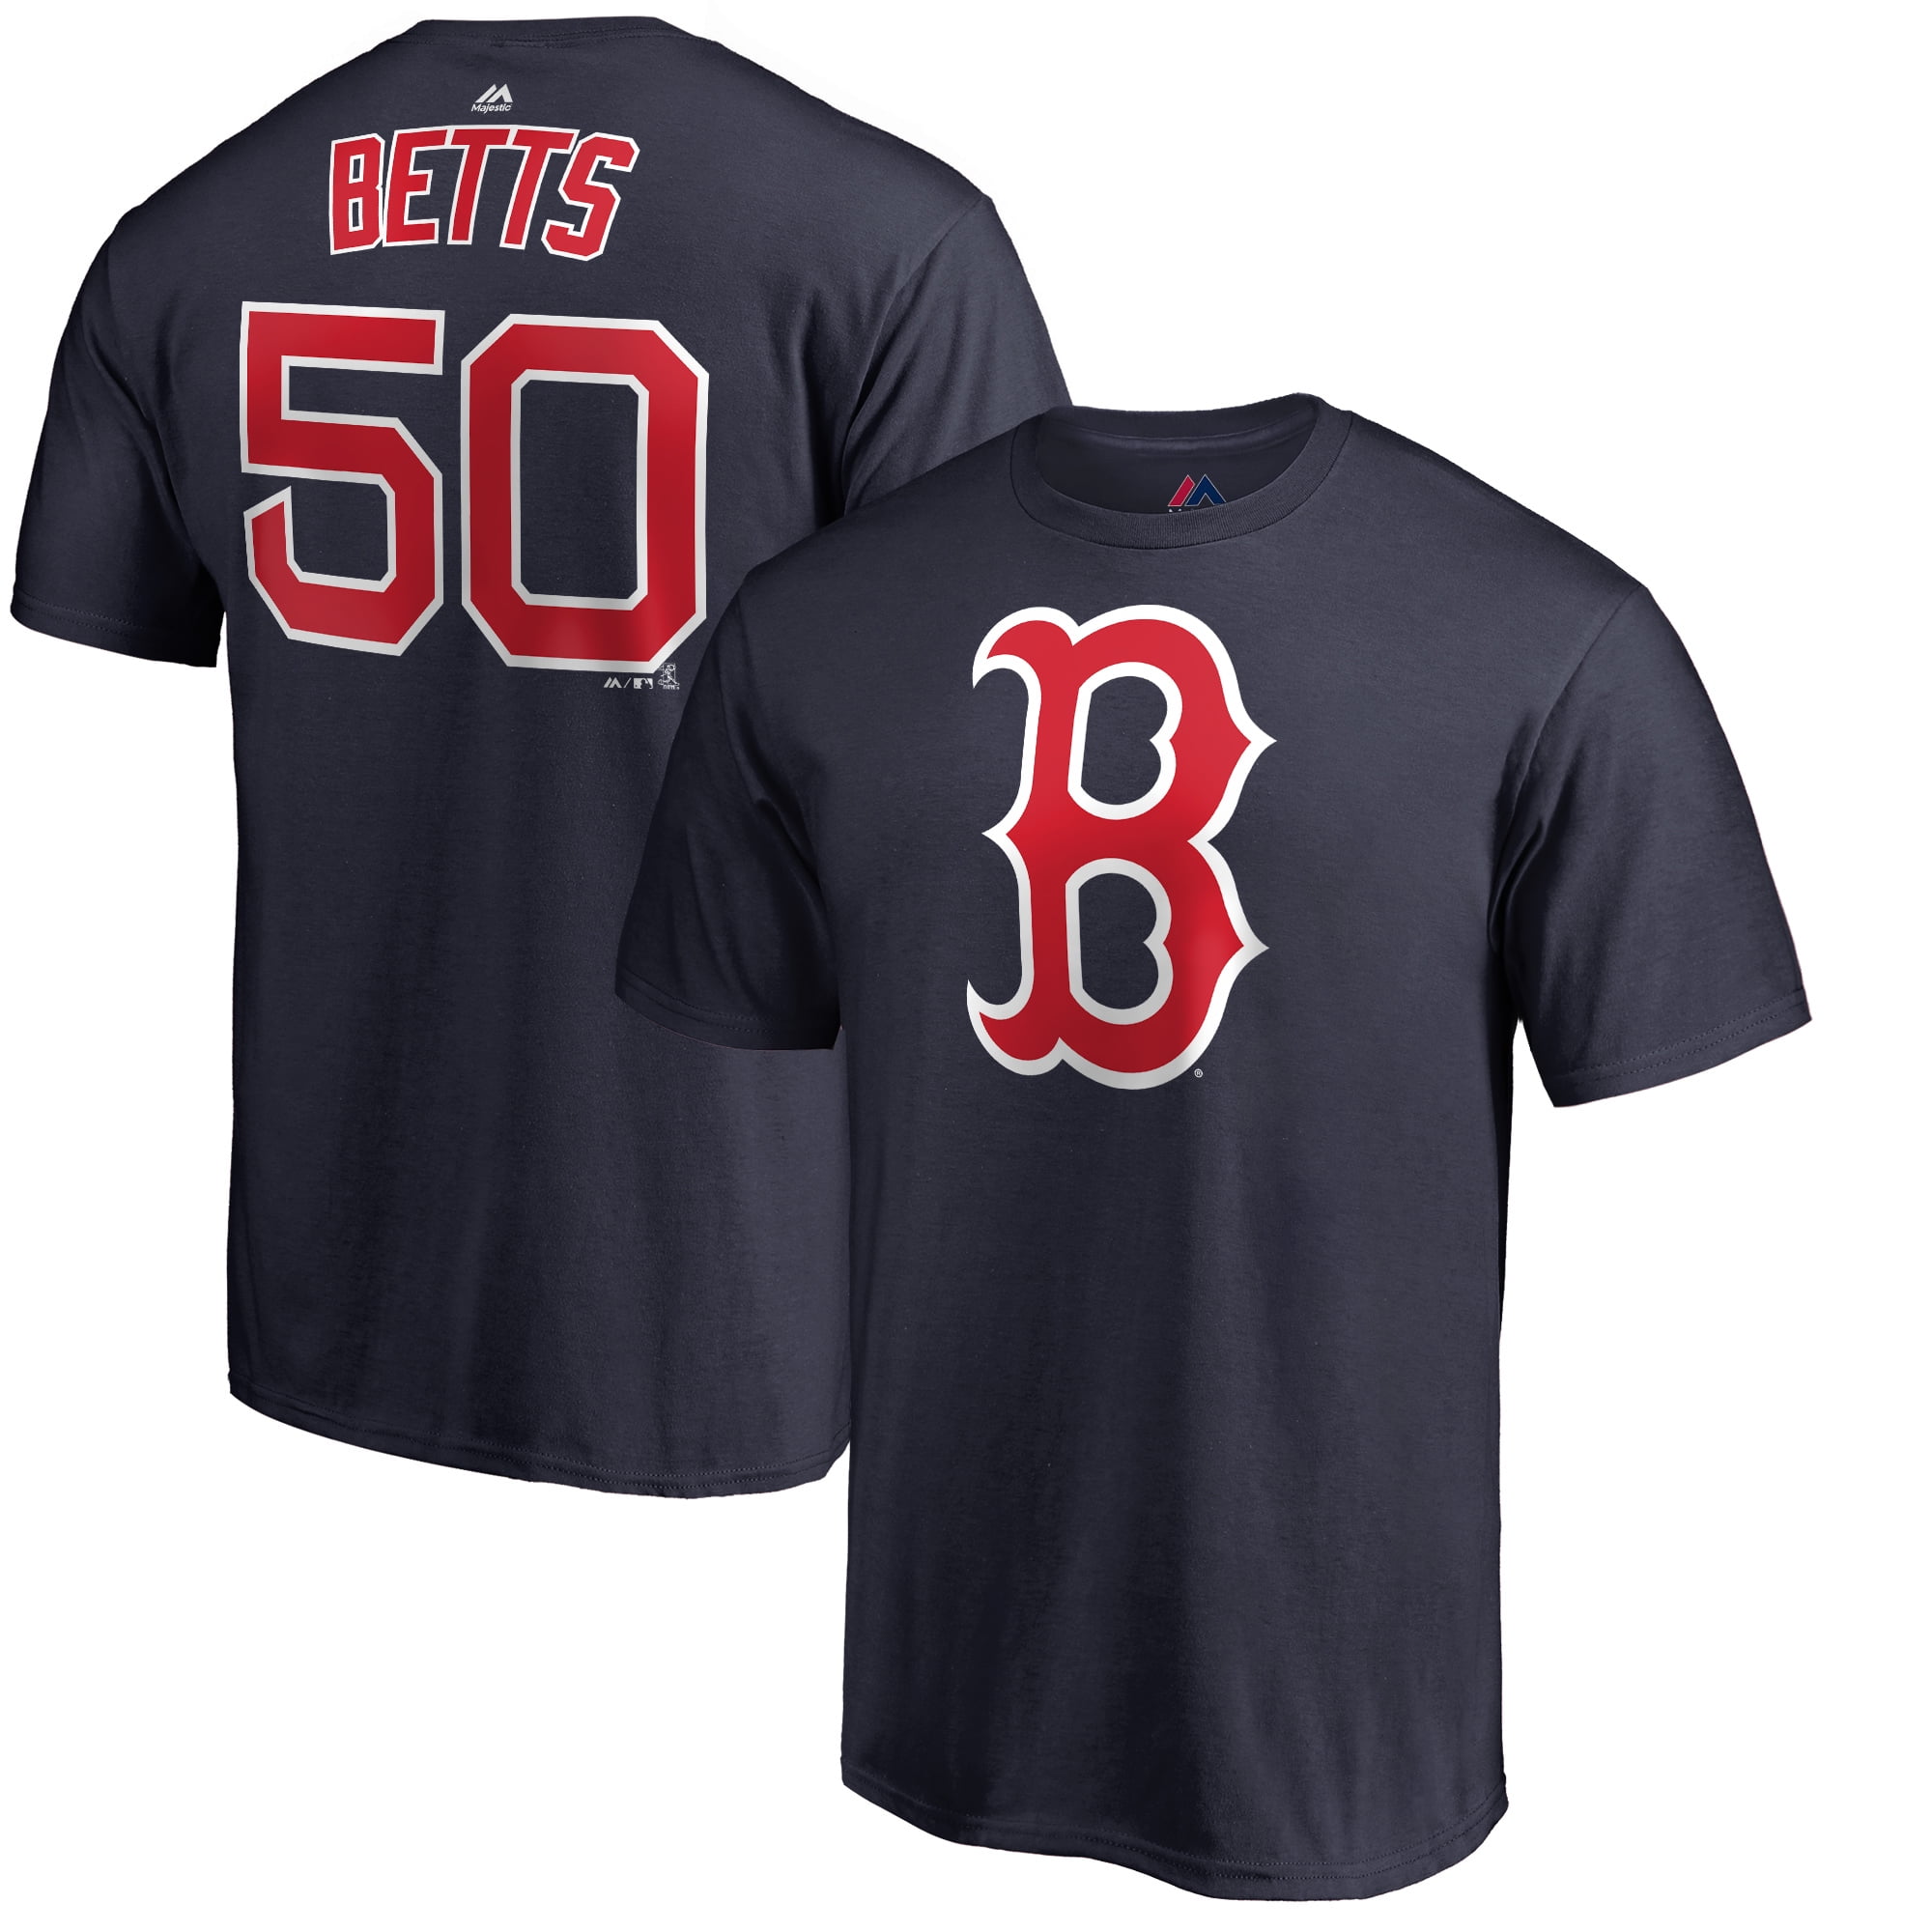 Mookie Betts Boston Red Sox Majestic Double Play Cap Logo Name & Number T-Shirt - Navy ...2000 x 2000